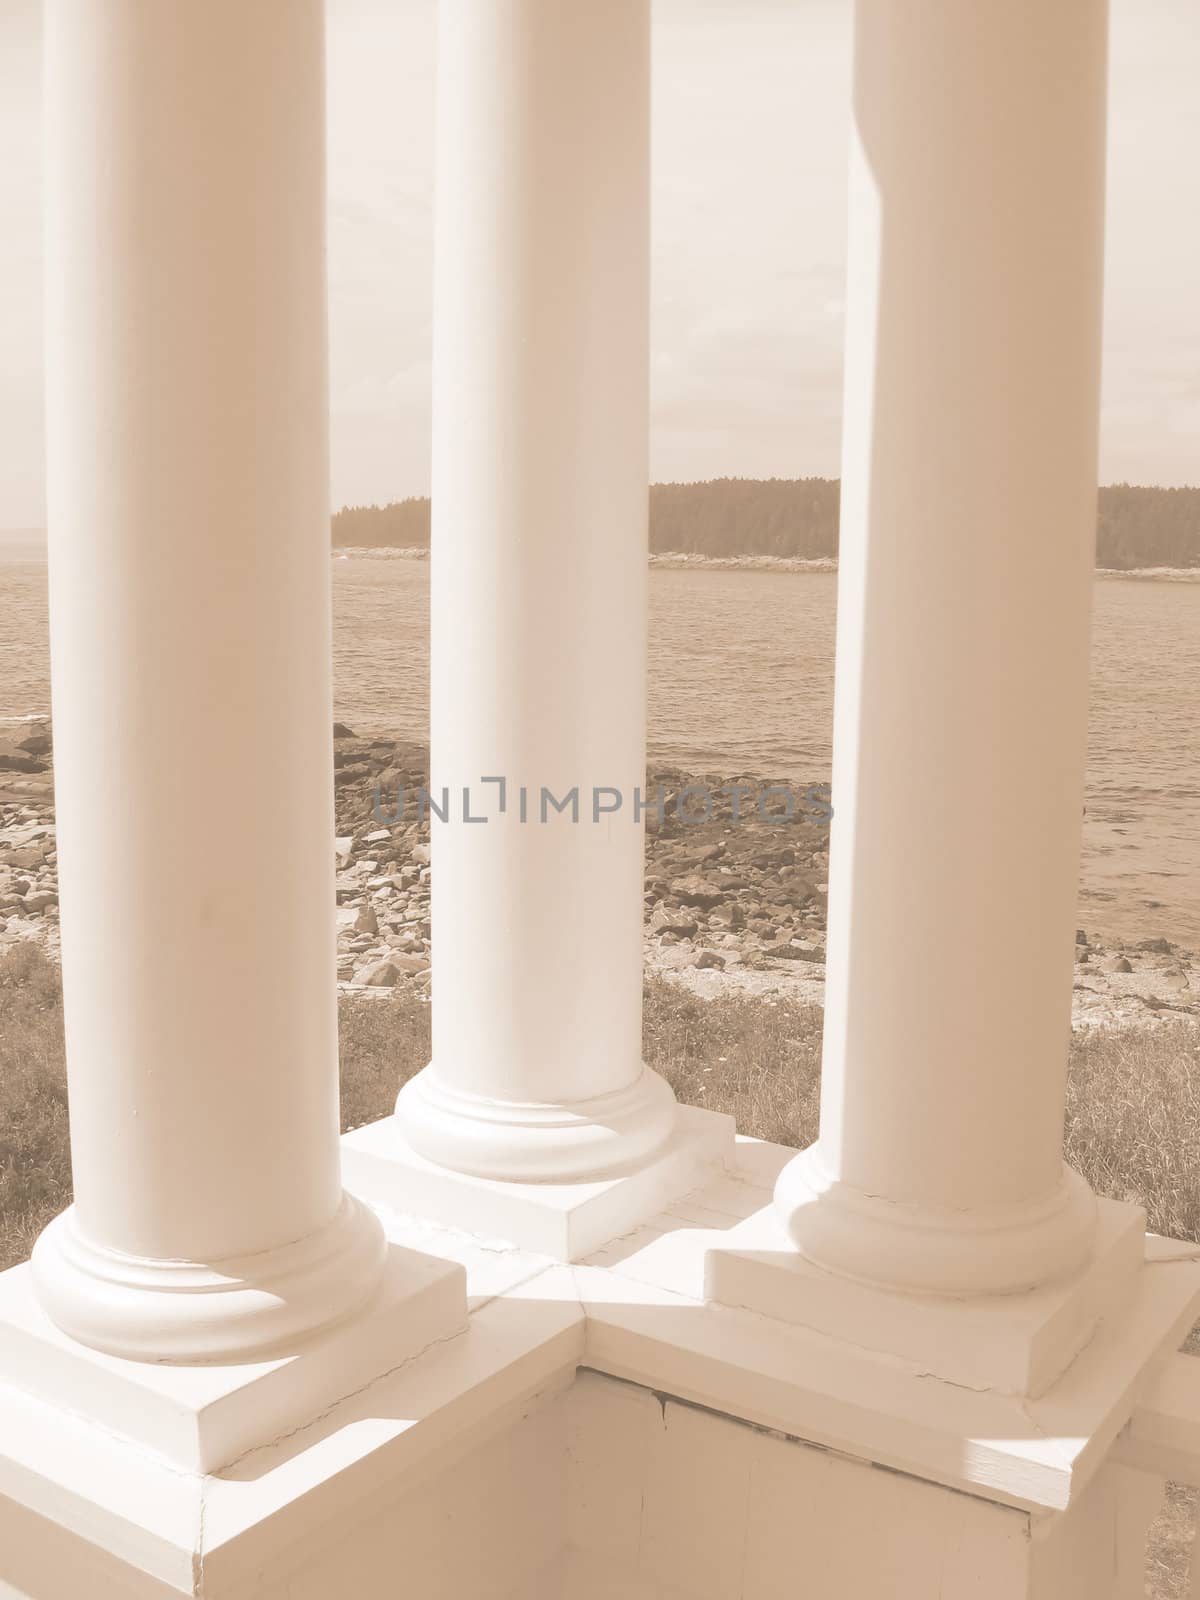 Three Columns in Sepia by loongirl